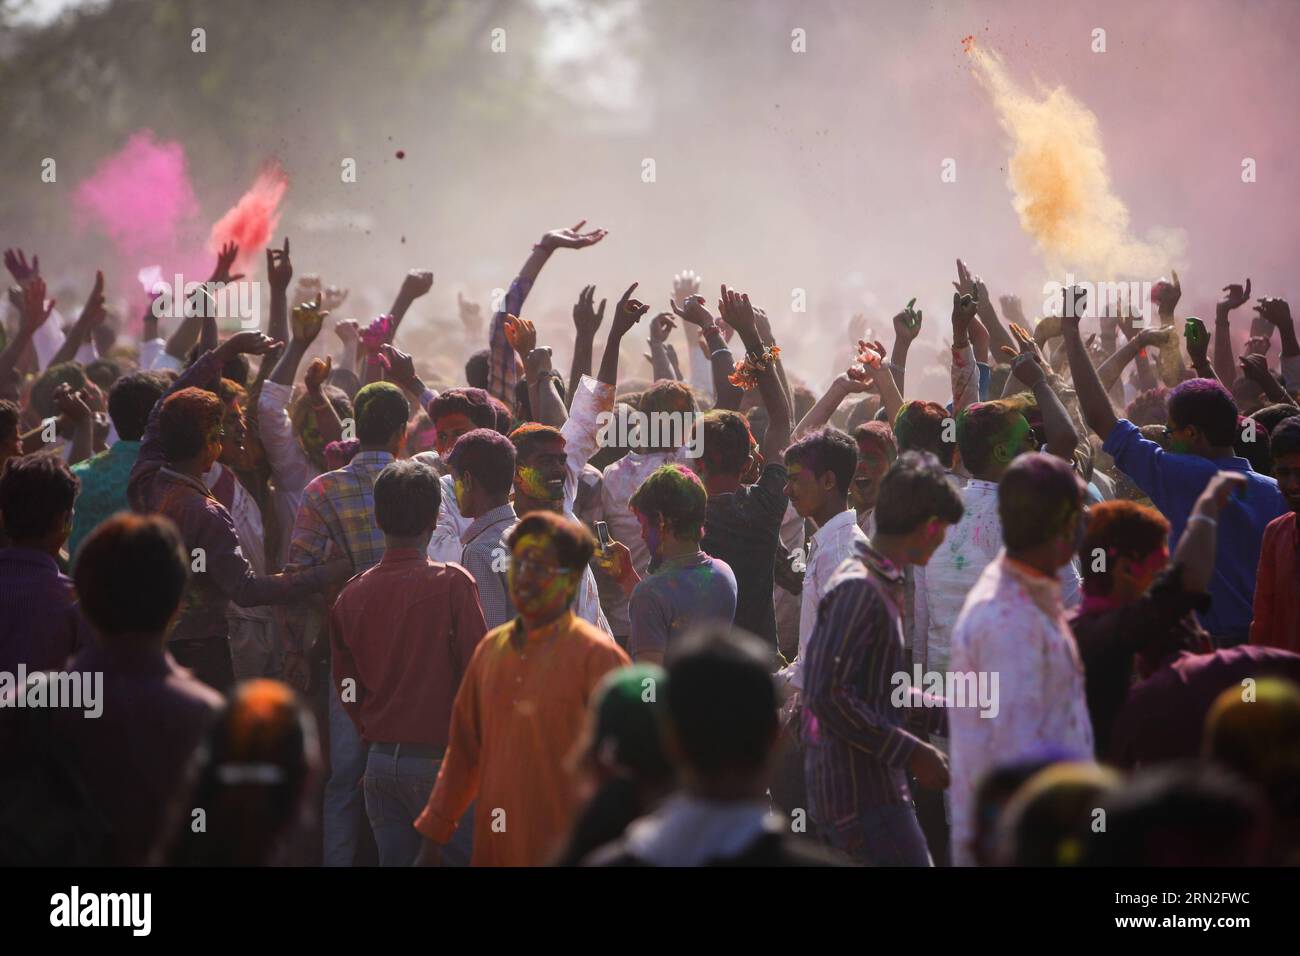 (150305) -- SANTINIKETAN, March 5, 2015 -- People throw colored powders as they dance to celebrate the holi festival in Santiniketan, a small town near Bolpur in the Birbhum district of West Bengal, India, on March 5, 2015. Holi , the festival of colors, is a popular celebration of the coming of spring and it falls in West Bengal of India on the day of full moon annually in March. People play with colored powder on each other with great joy. ) INDIA-WEST BENGAL-HOLI ZhengxHuansong PUBLICATIONxNOTxINxCHN   March 5 2015 Celebrities Throw Colored Powders As They Dance to Celebrate The Holi Festiv Stock Photo